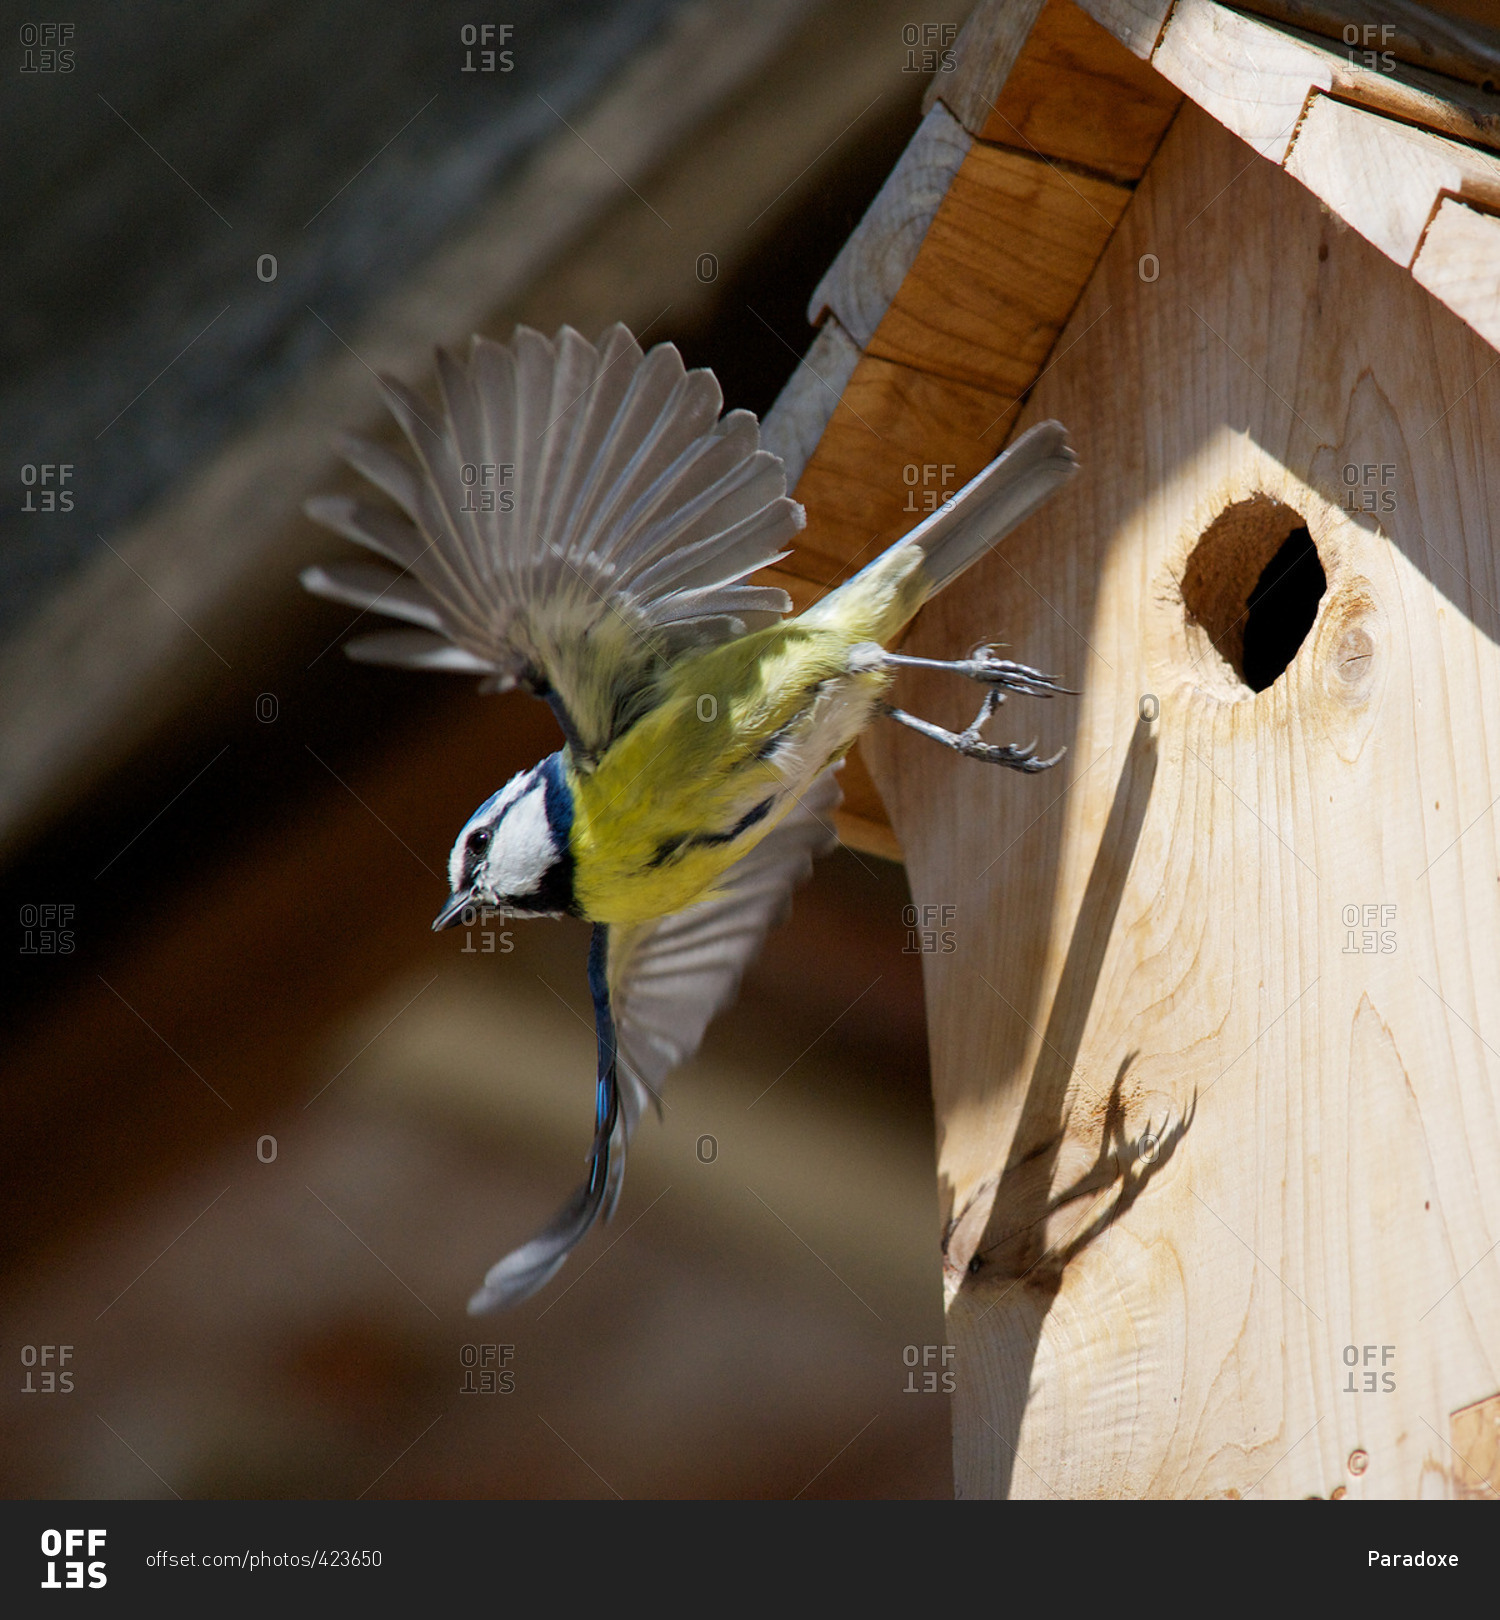 Blue tit (Cyanistes caeruleus) flying away from wooden birdhouse